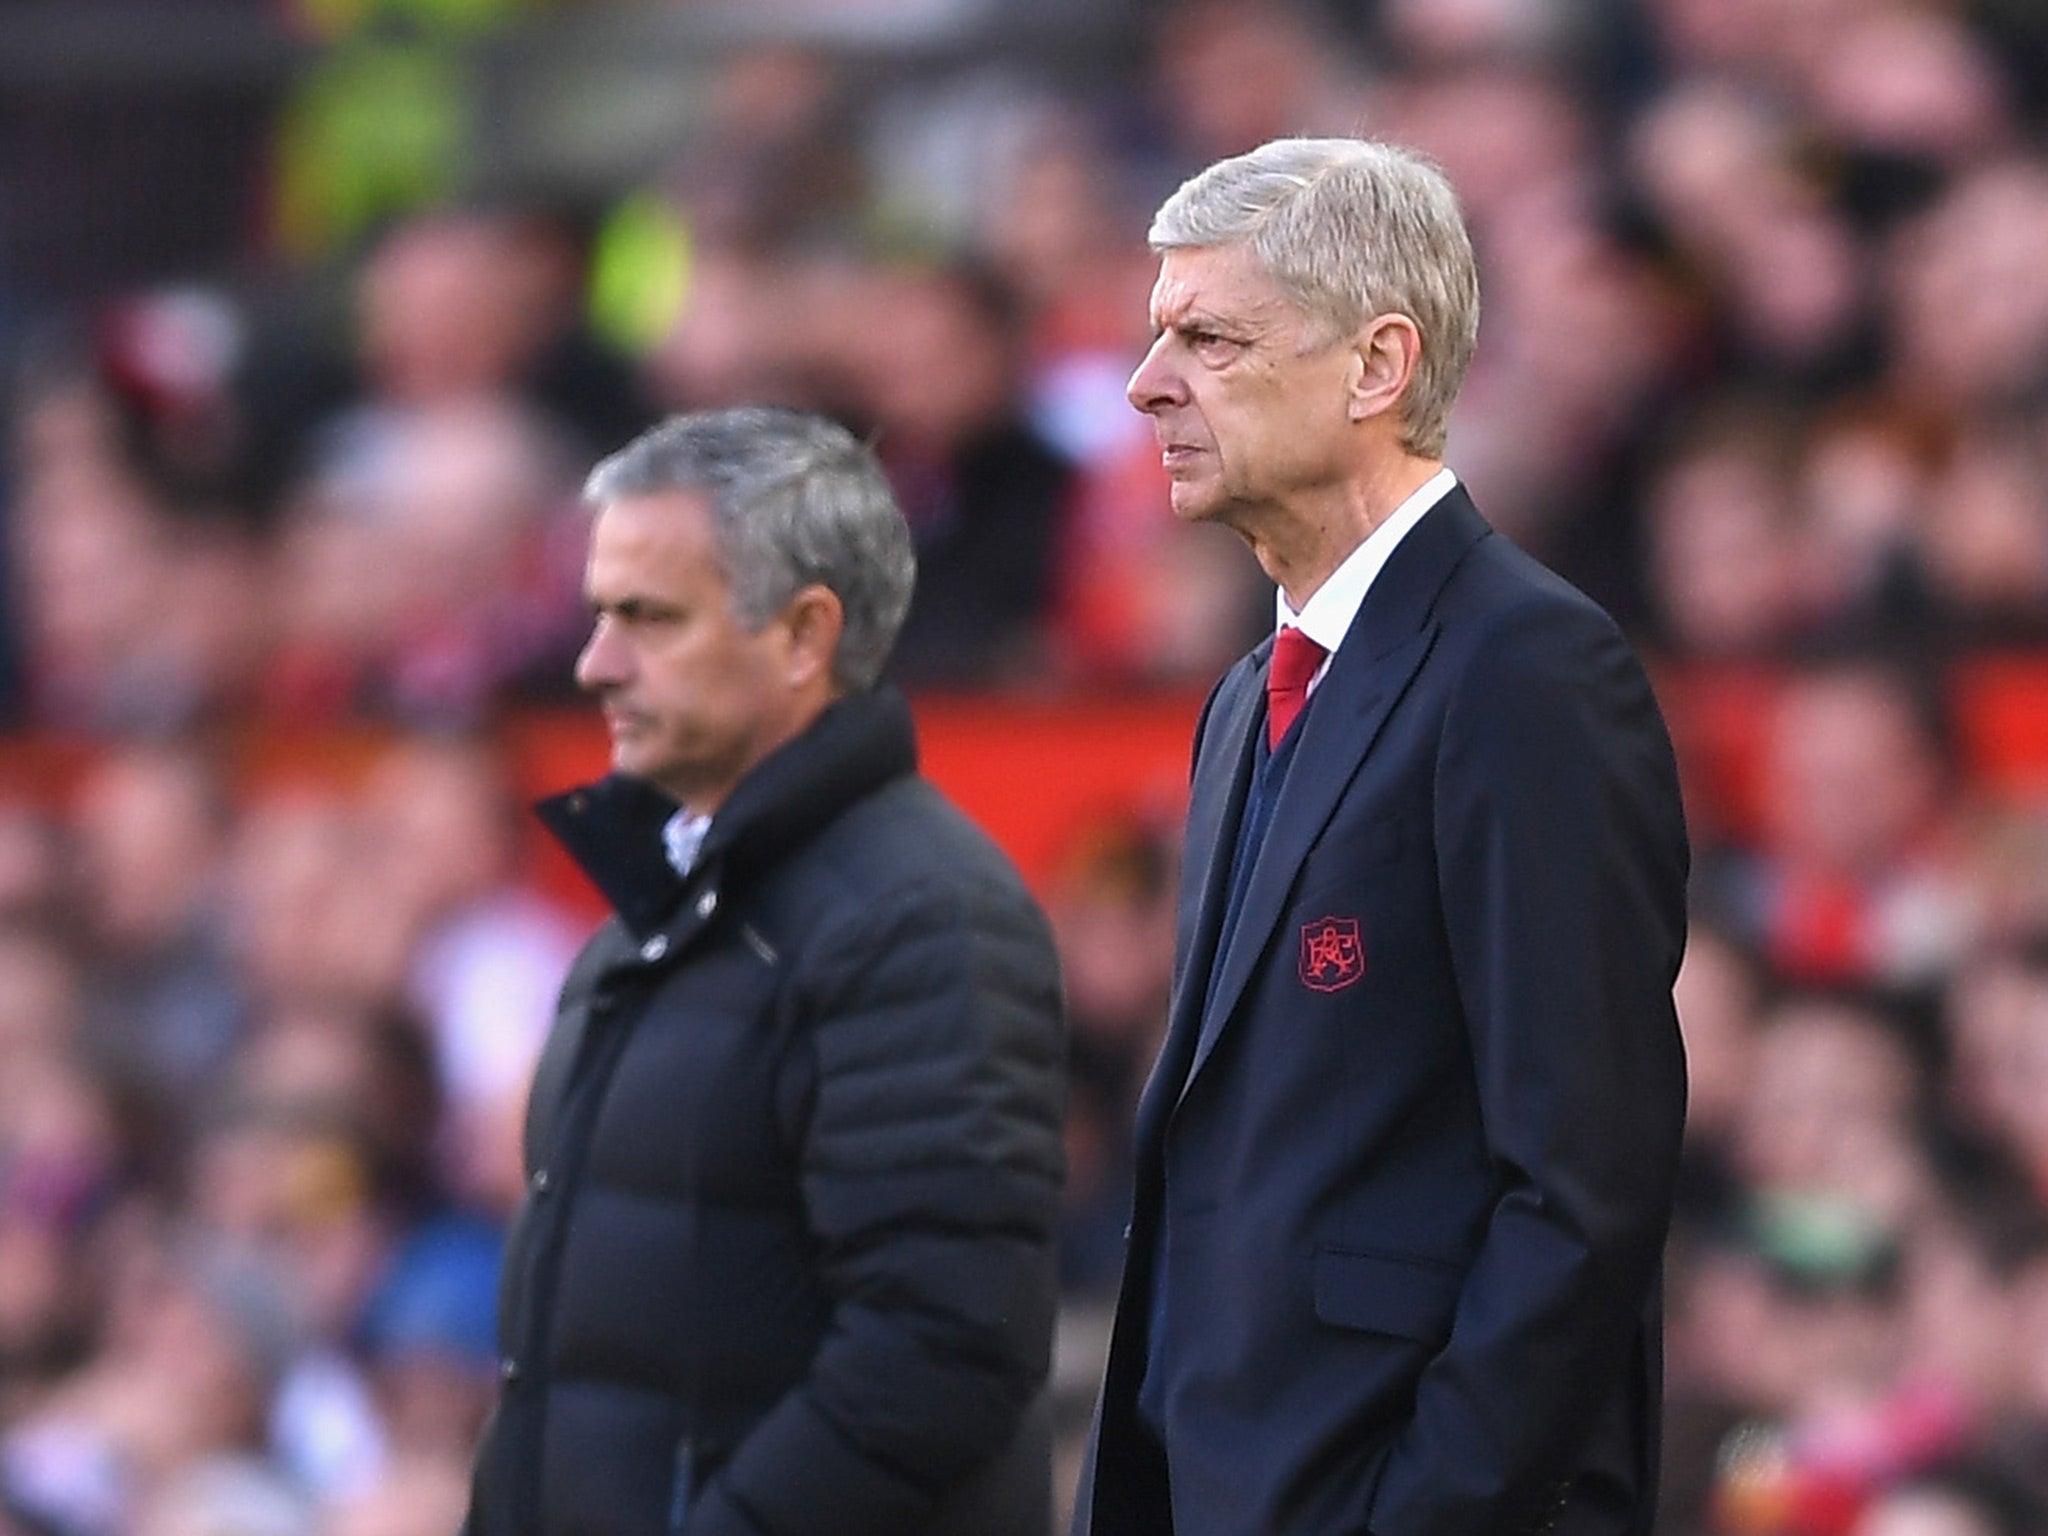 Both Arsene Wenger and Jose Mourinho claim that there is more 'respect' between them now